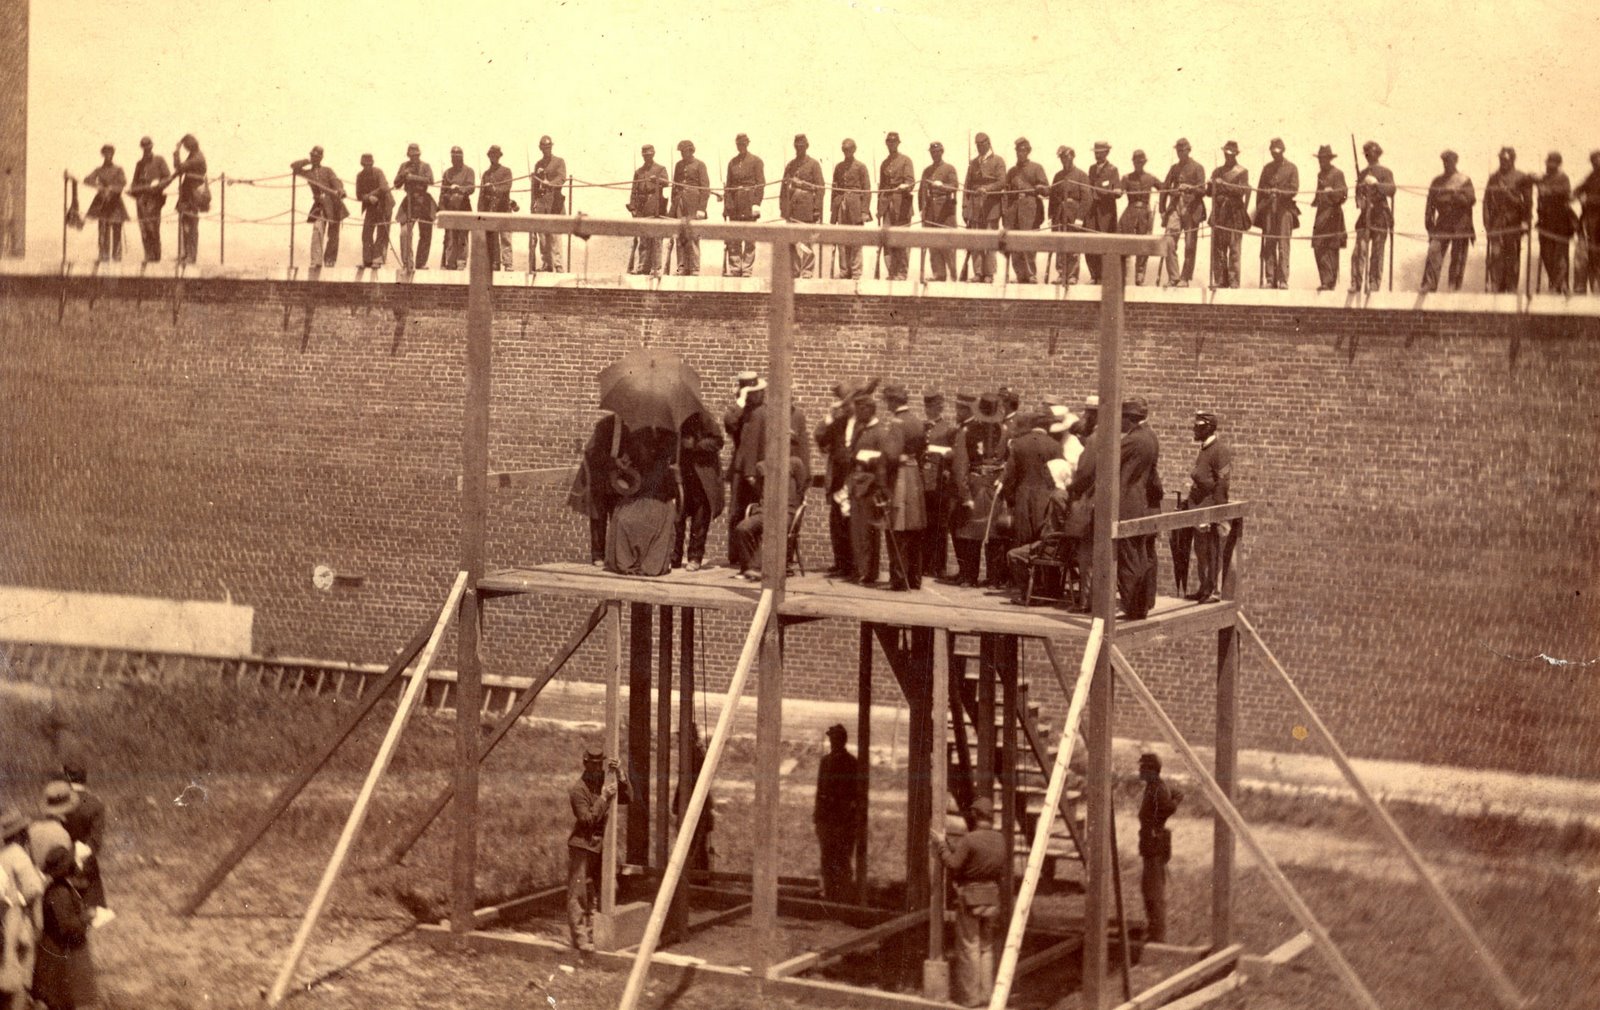 Photograph of four Lincoln assassination conspirators standing on a platform awaiting their public hanging in Washington D.C. Ft. McNair